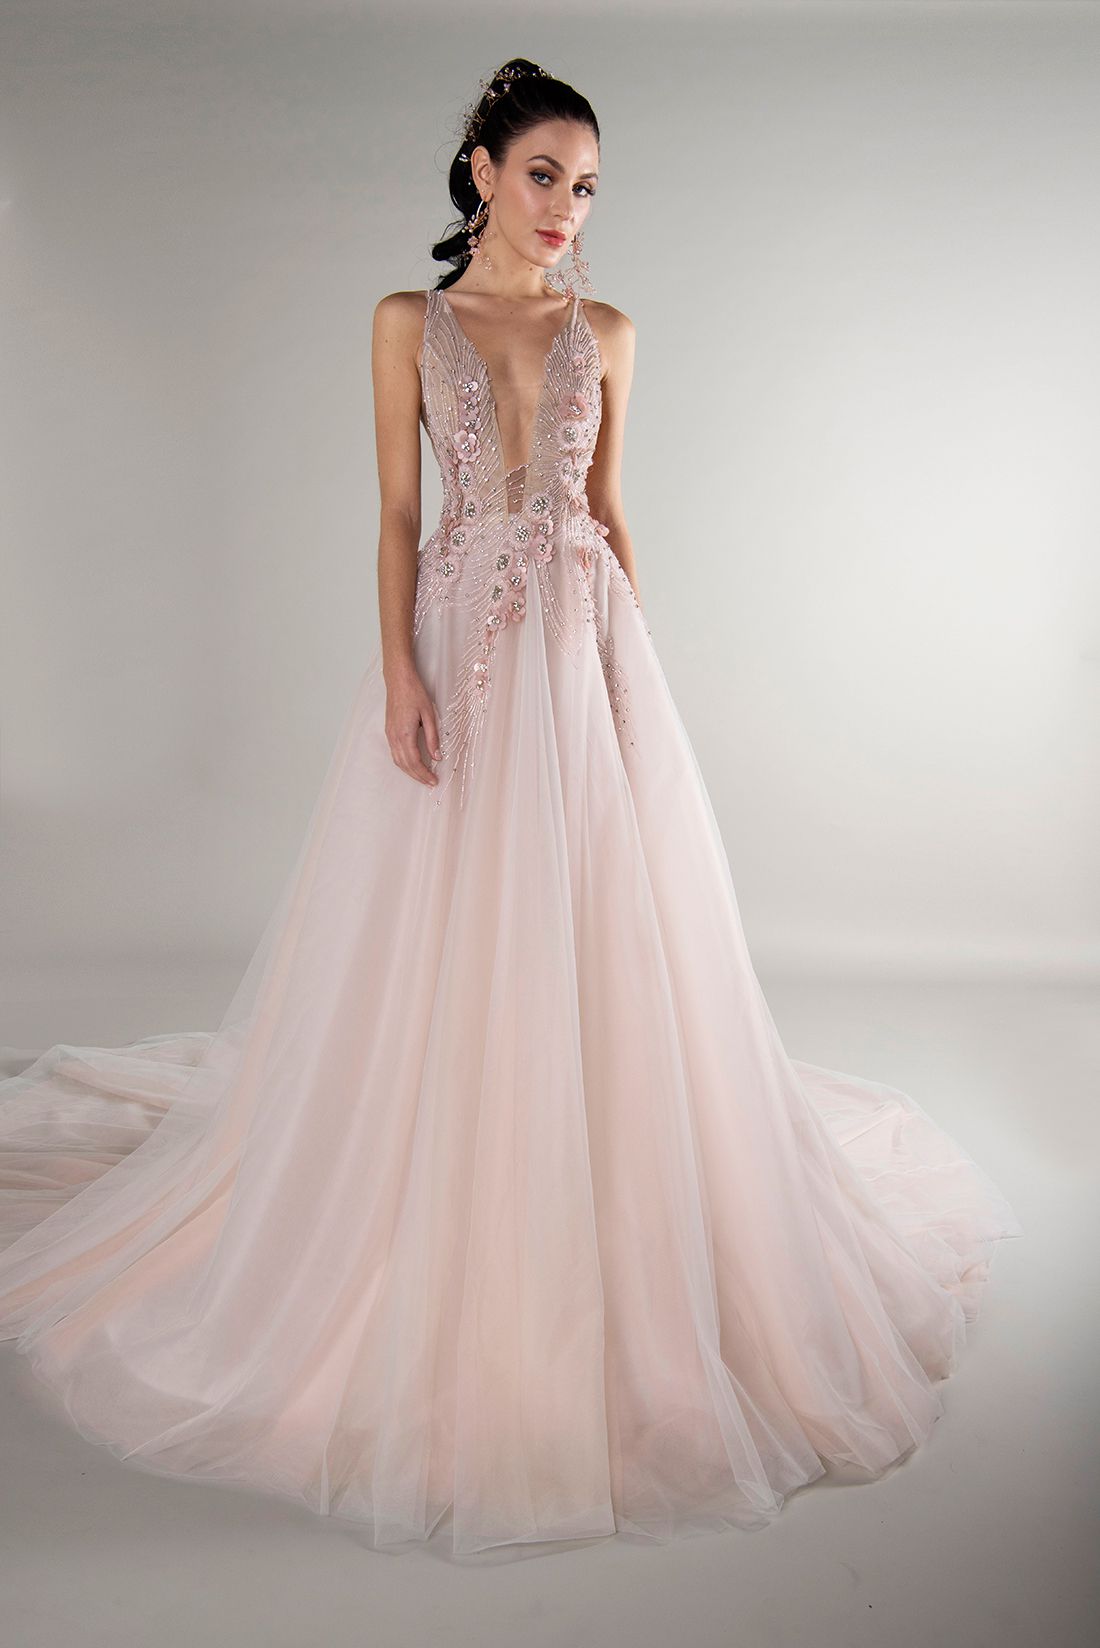 yumi katsura fall 2019 ball gown plunging neckline sleeveless floral beaded applique pink